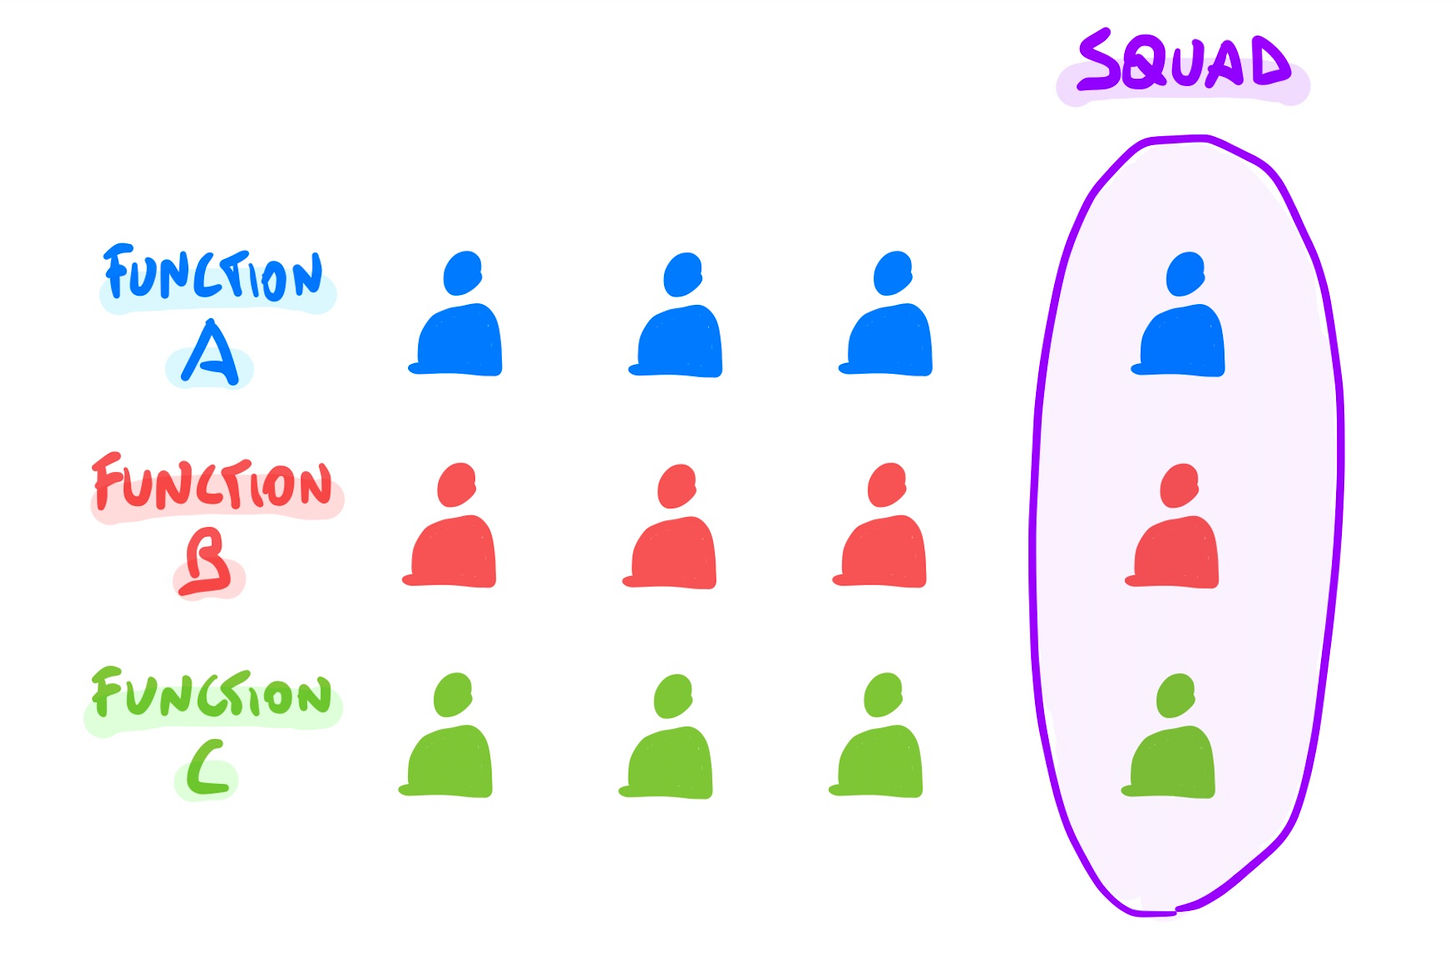 A Squad is a long-lived team responsible for a product or business area, made of people with multiple skills